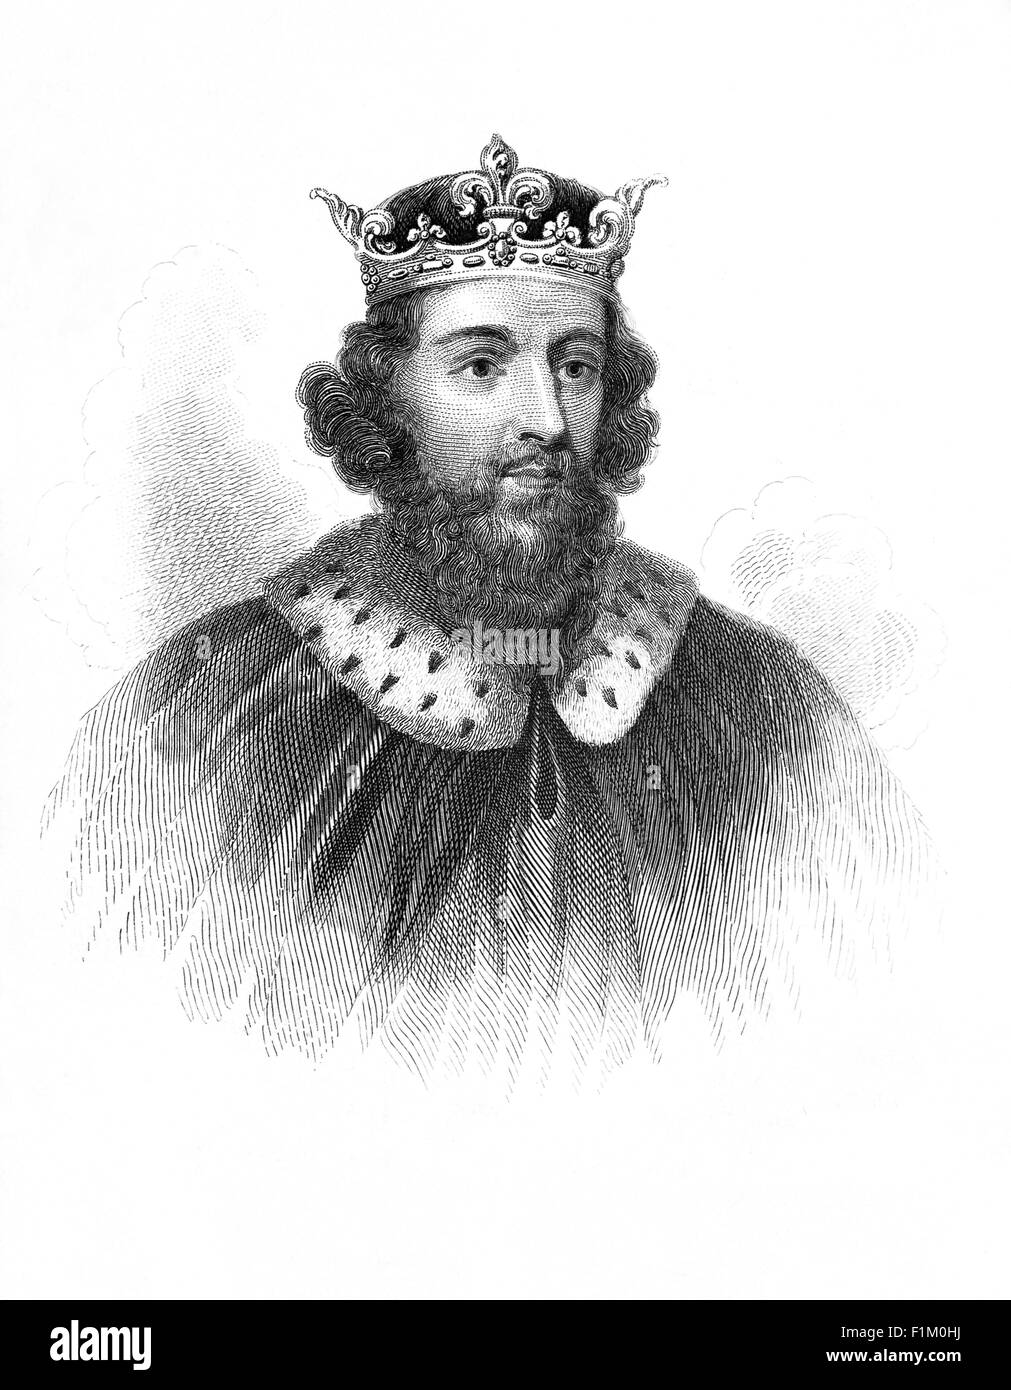 King Alfred (849–899AD) aka Alfred the Great, king of the West Saxons from 871-886 and king of the Anglo-Saxons from 886-99 was considered to be the first King of England. After ascending the throne, Alfred spent several years fighting Viking invasions winning a decisive victory in the Battle of Edington in 878 and made an agreement with the Vikings, creating what was known as the Danelaw in the North of England. Alfred also oversaw the conversion of Viking leader Guthrum to Christianity. He defended his kingdom against the Viking attempt at conquest, becoming the dominant ruler in England. Stock Photo